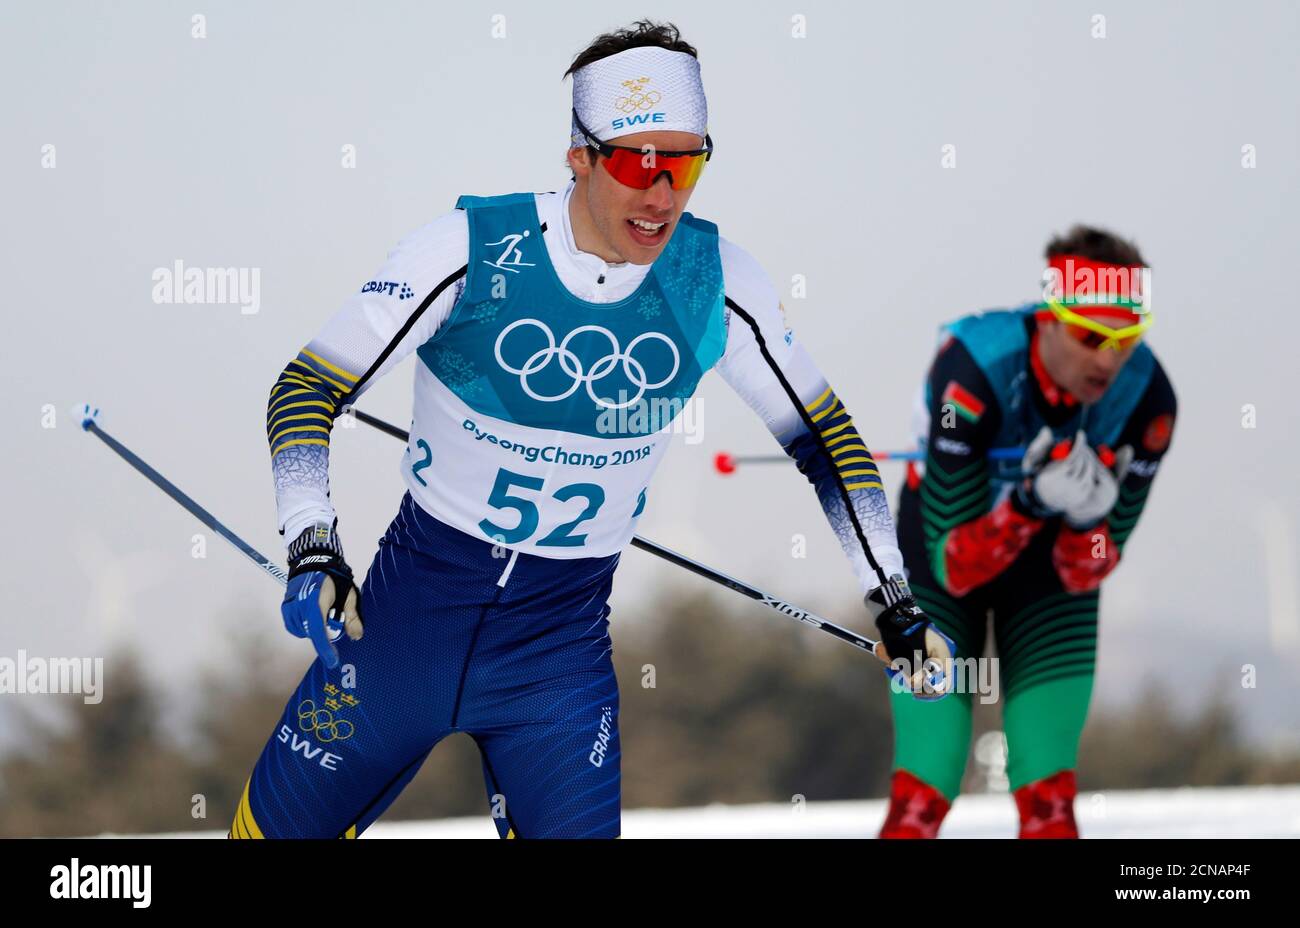 Cross-Country Skiing - Pyeongchang 2018 Winter Olympics - Men’s 15km Free - Alpensia Cross-Country Skiing Centre - Pyeongchang, South Korea - February 16, 2018 - Marcus Hellner of Sweden competes. REUTERS/Murad Sezer Stock Photo